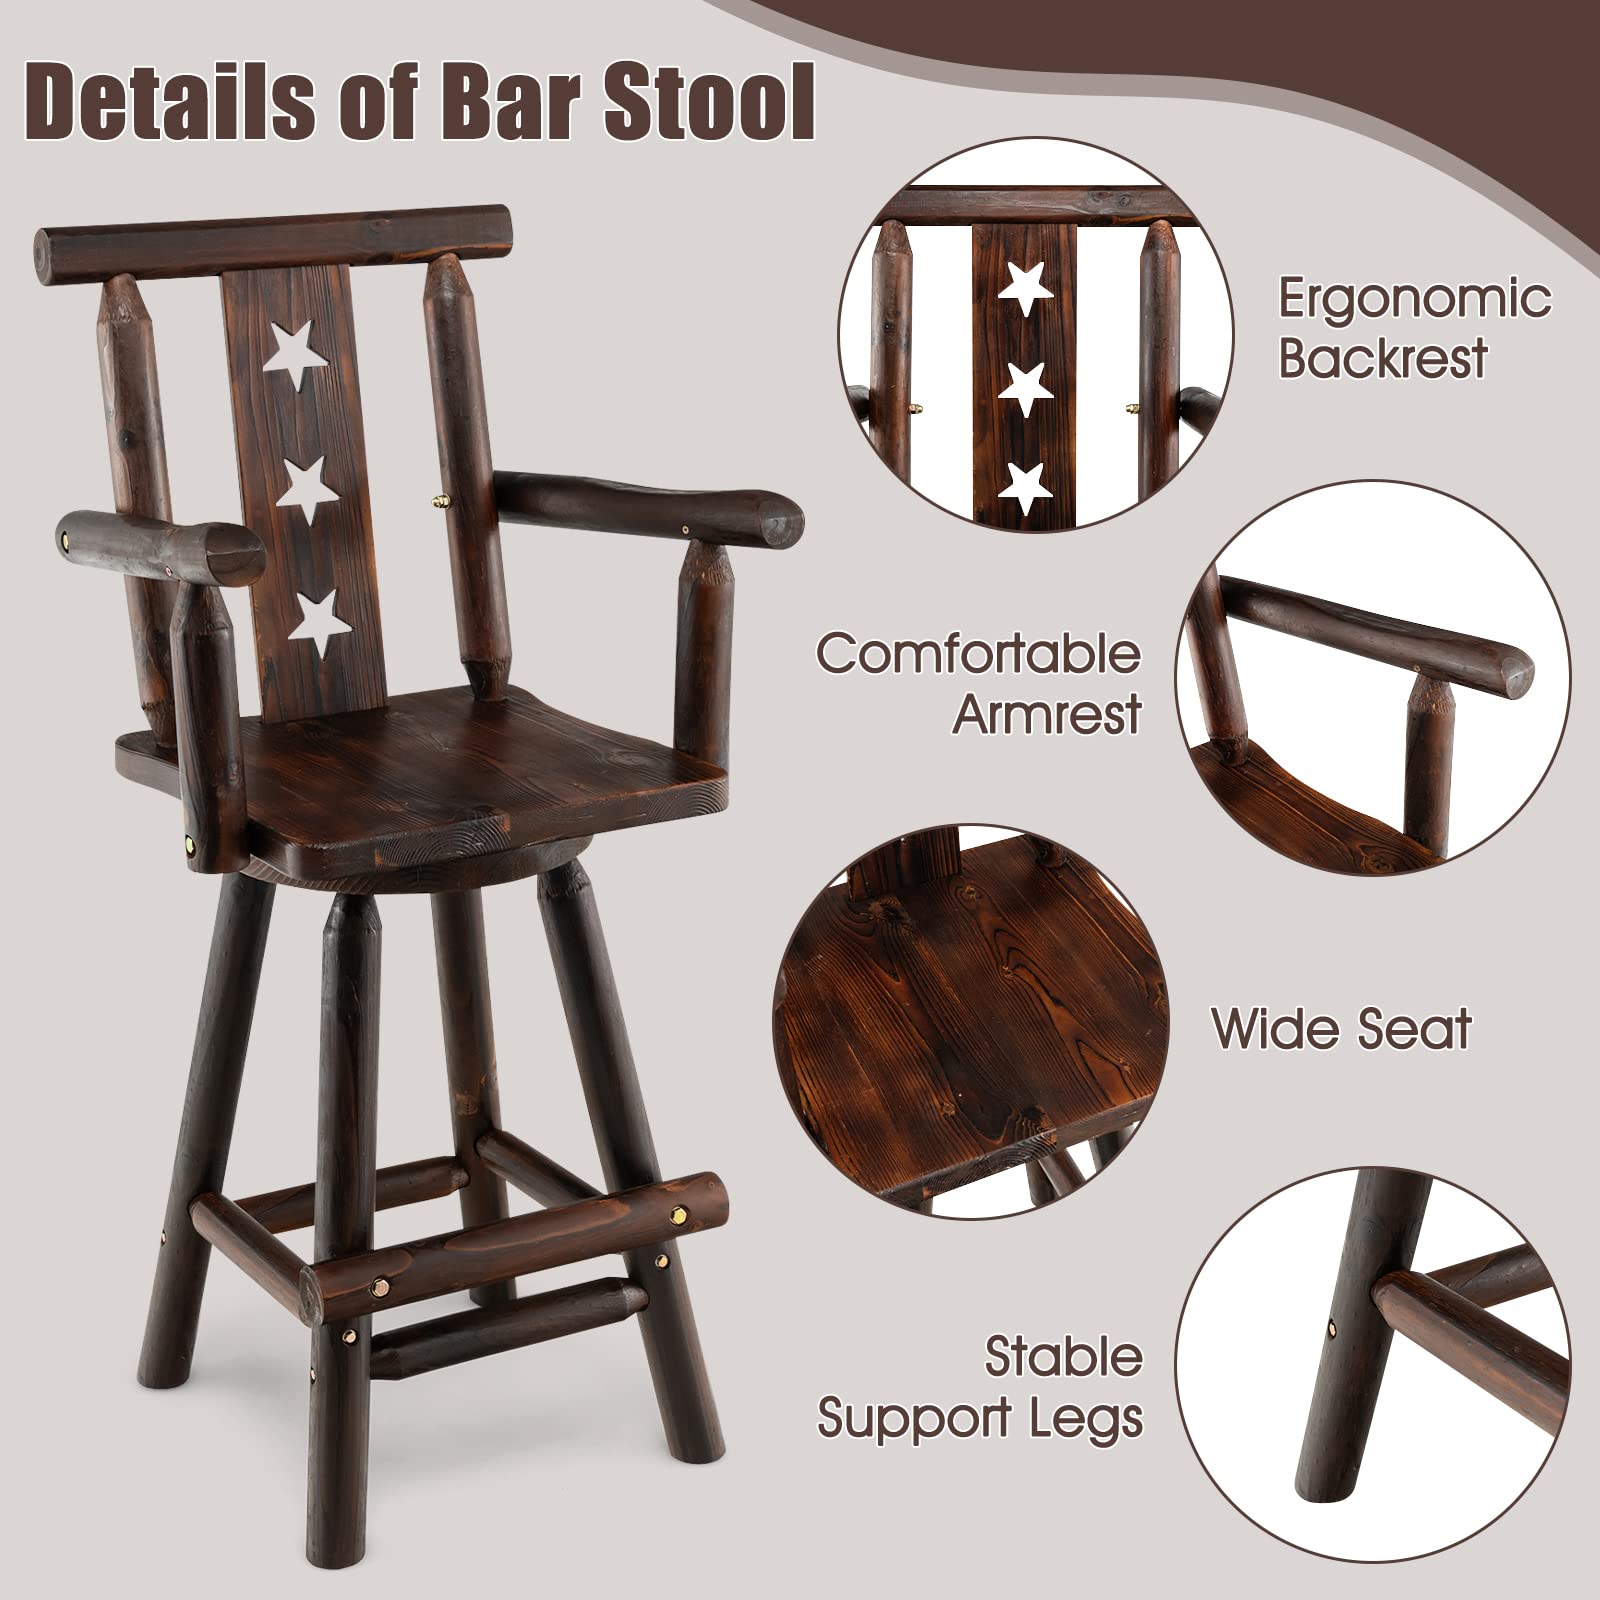 Brown Bar Stool, 29’’ Solid Fir Wood Bar Chair with Footrest, Decorative Star Backrest, Wide Armrest, Rustic Kitchen Stool